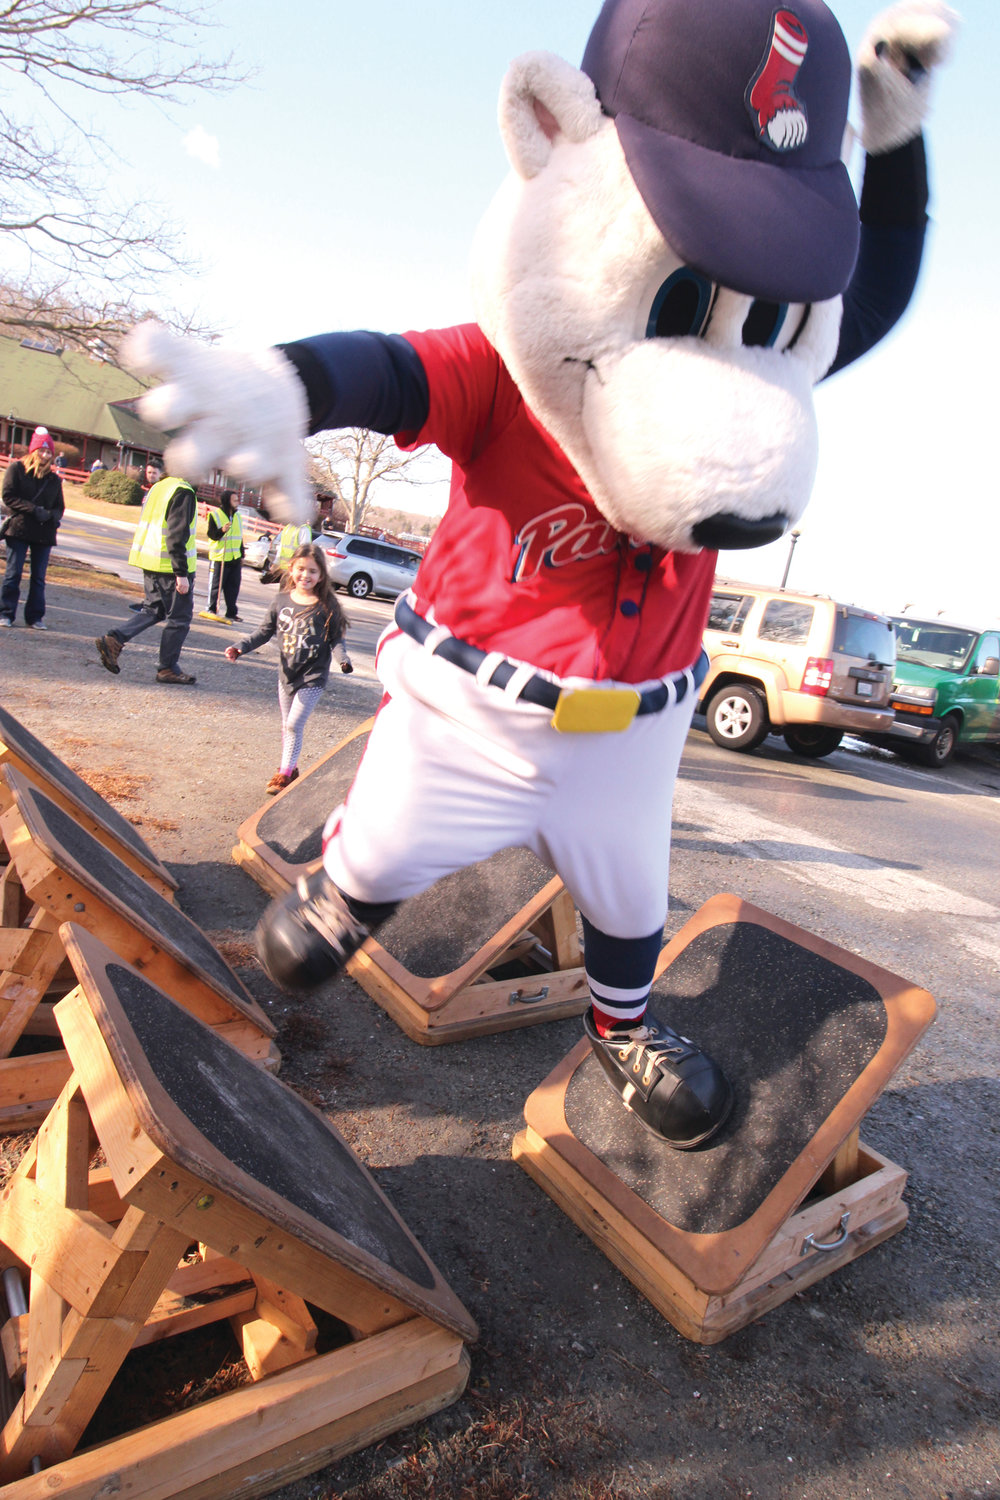 KEEPING HIS BALANCE: The PawSox mascot takes to the kiddie obsta course.